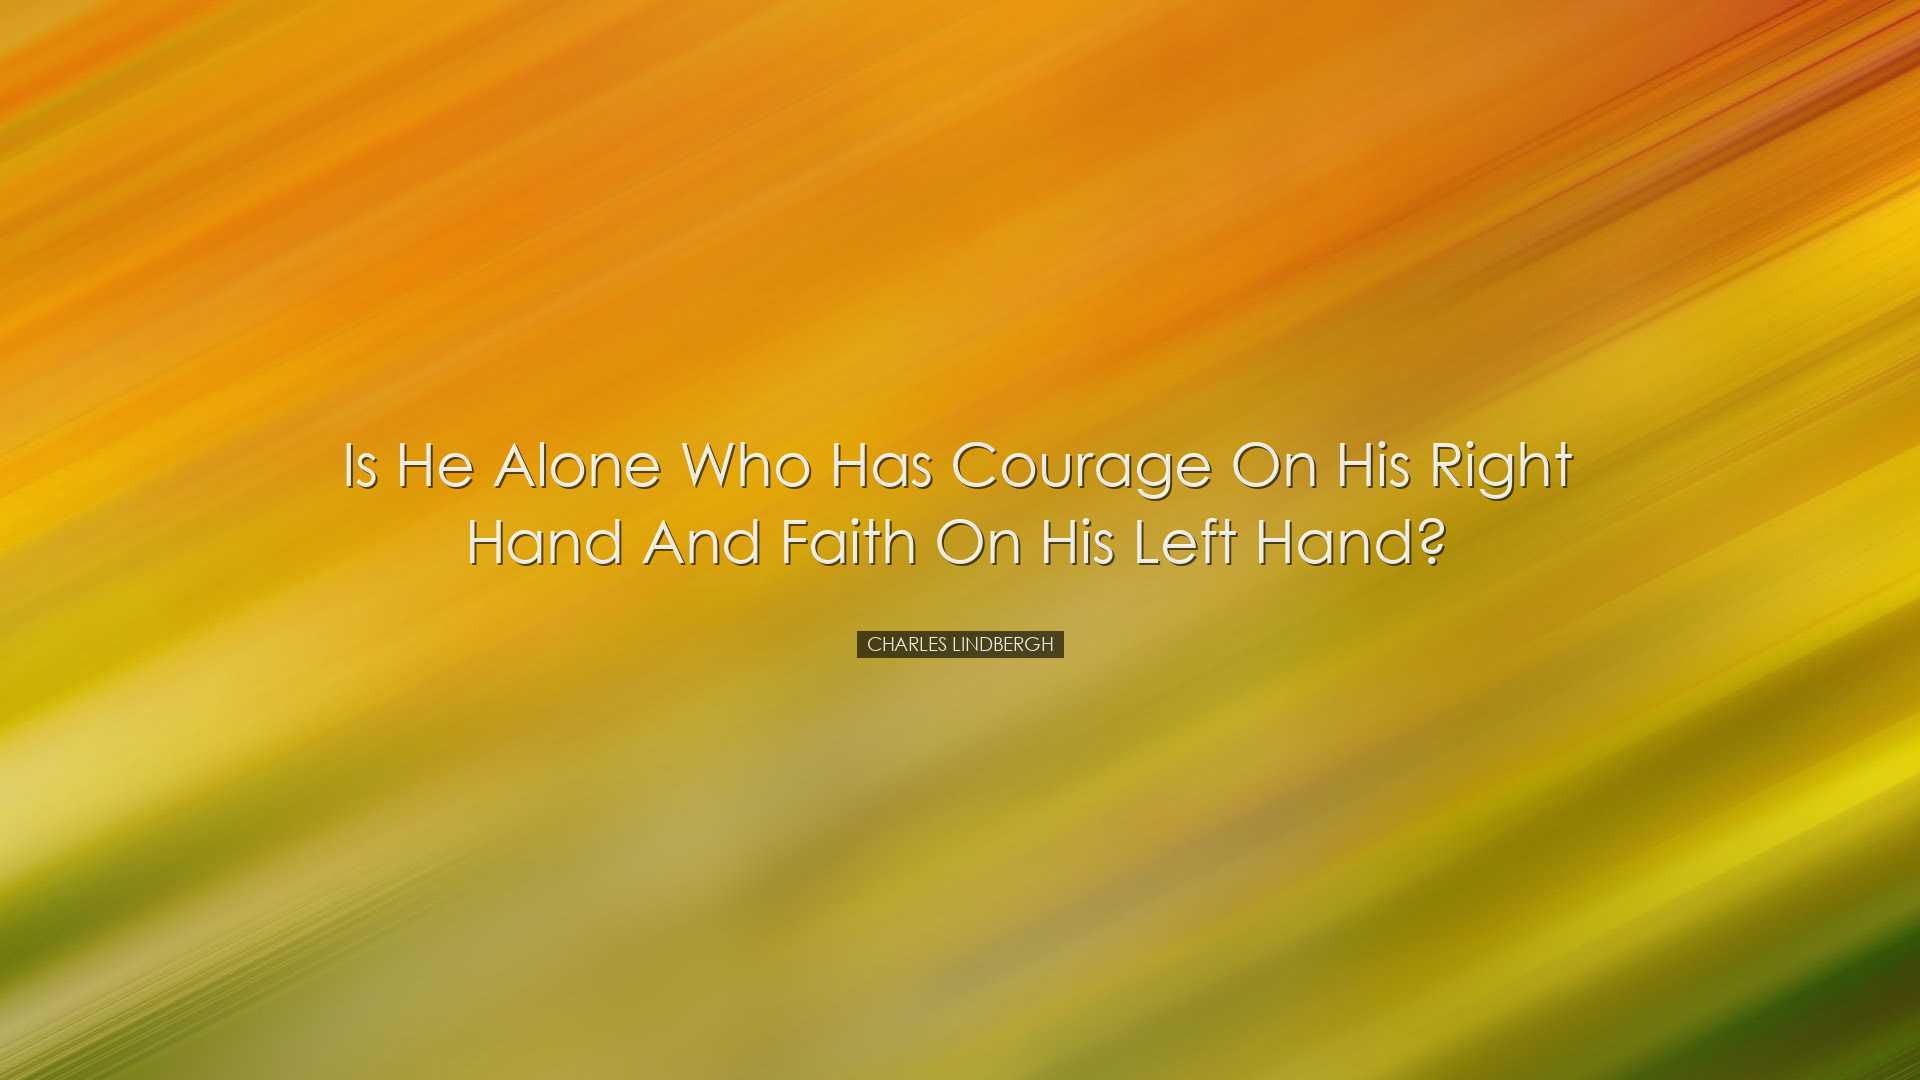 Is he alone who has courage on his right hand and faith on his lef